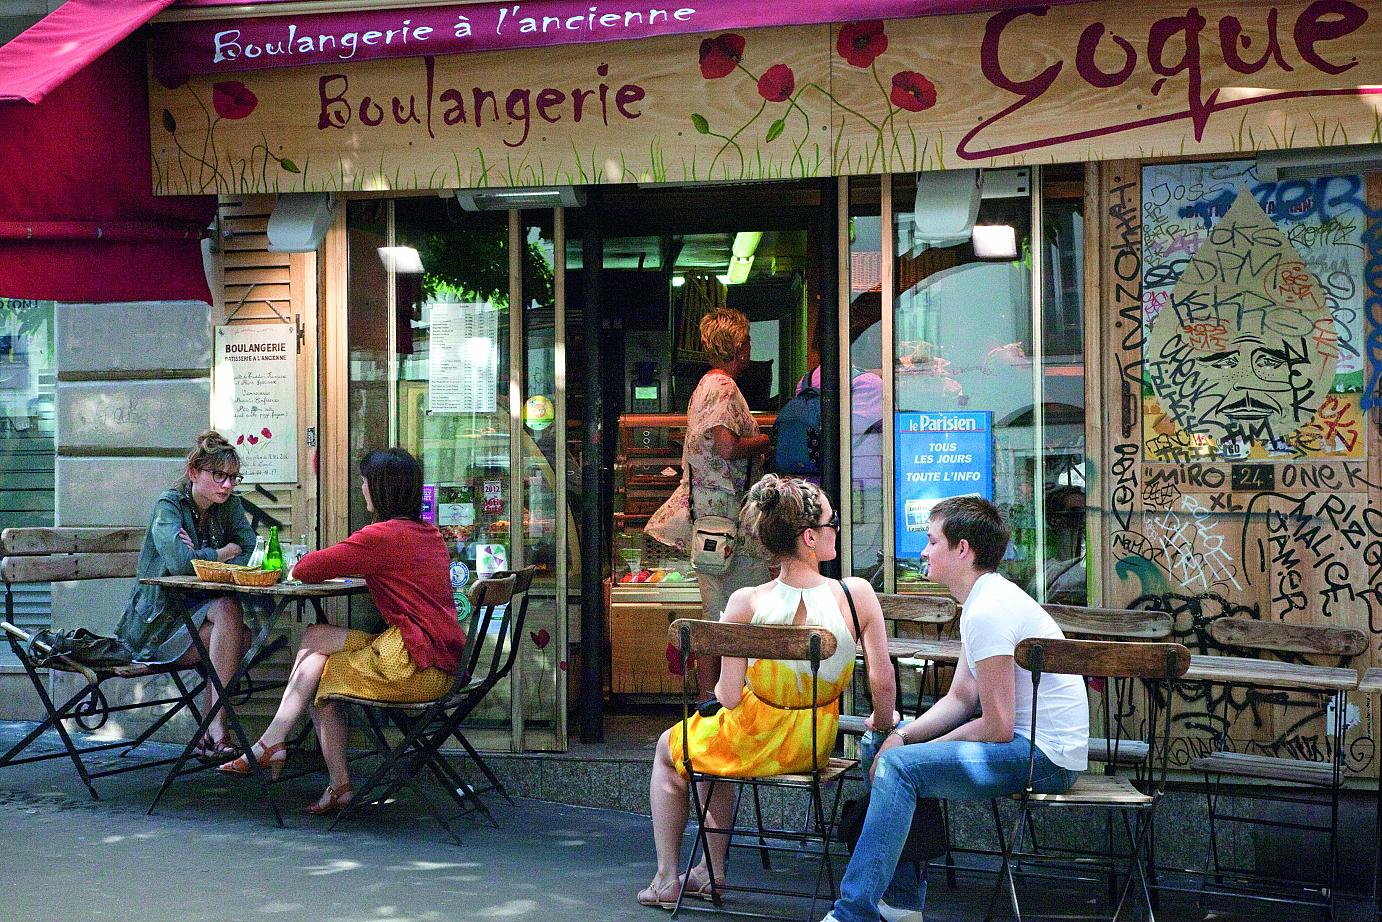  Montmartre served as filming location for La Môme (La vie en rose), about the life of French singer Edith Piaf, and of Amélie, the story of a wondrous young Parisian woman or of Moulin Rouge, starring Nicole Kidman and Ewan McGregor.